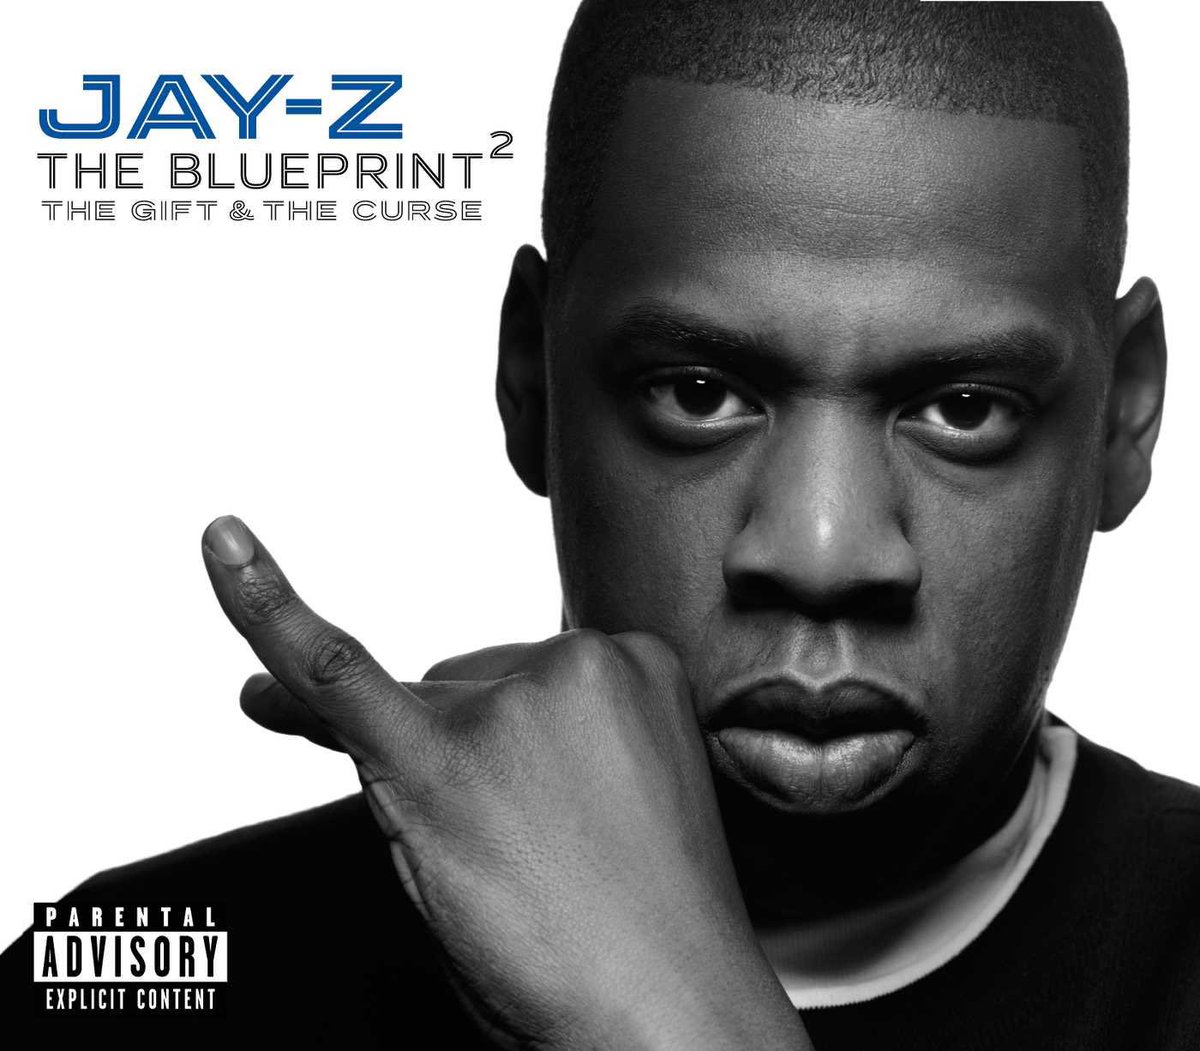 11. The Blueprint 2The long runtime of the album plagues it from being ranked higher, the album consists of some of the legendary rapper’s best b sidesFavorite track: Blueprint 2